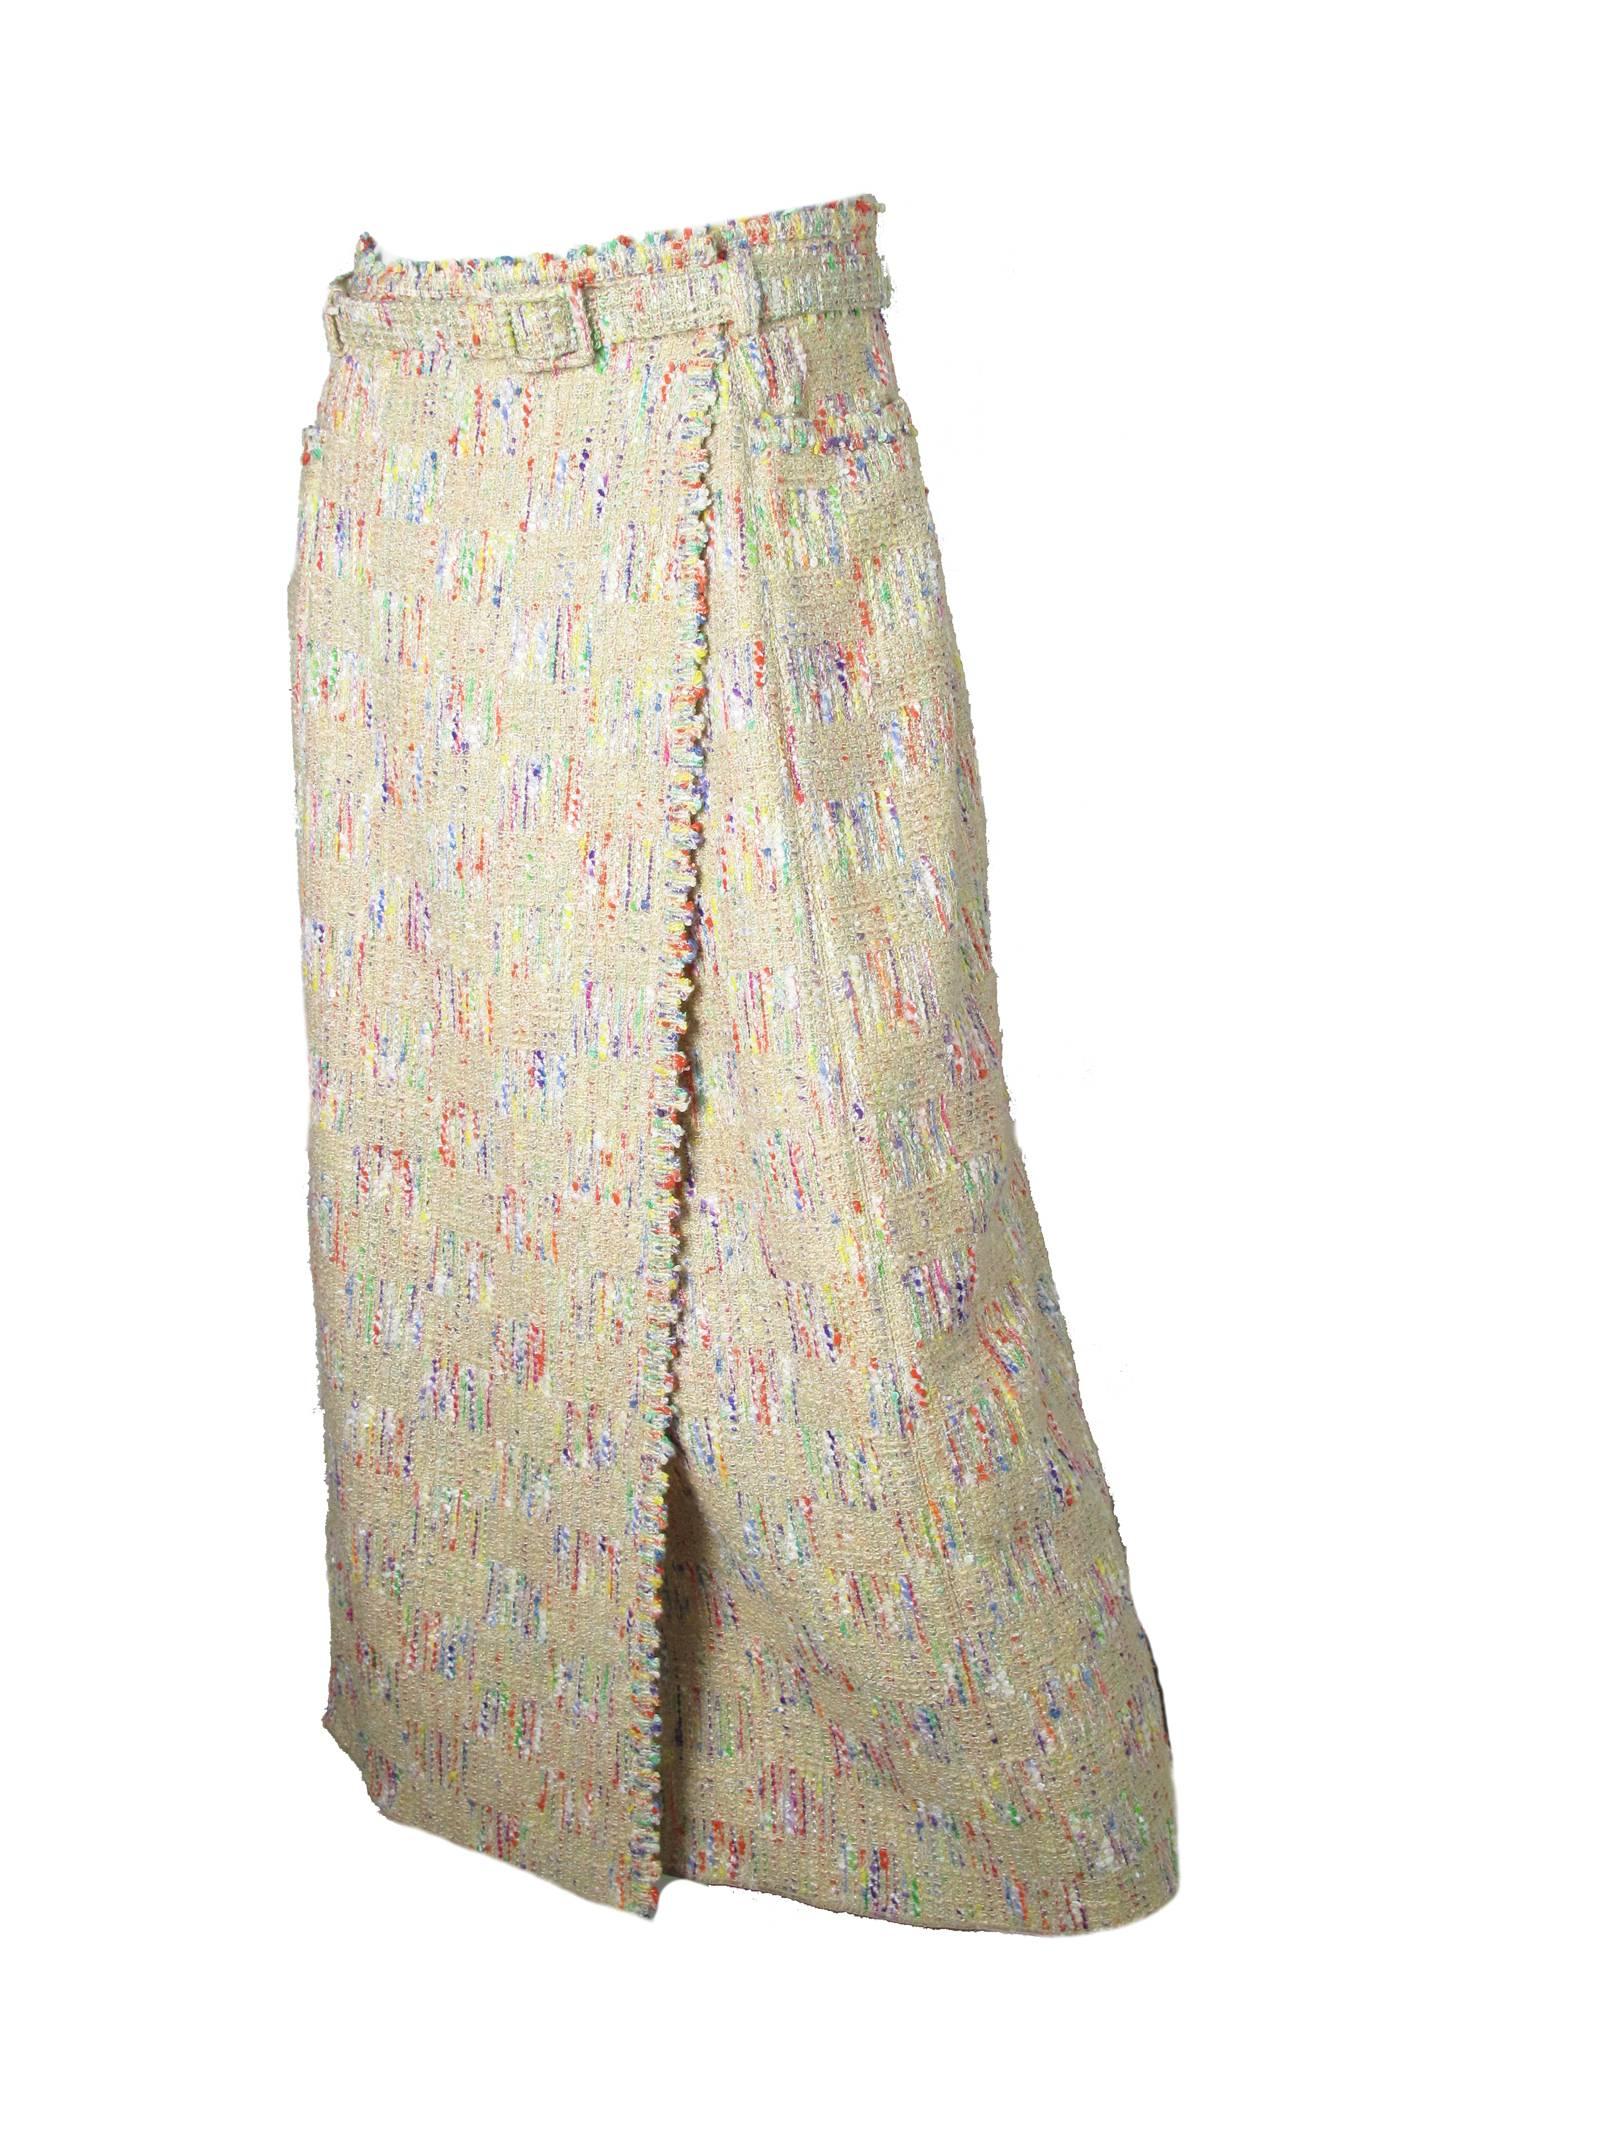 1998 Chanel Fantasy tweed wrap skirt with belt. Nylon, cotton, wool, rayon, poly, acrylic. With two front pockets. Made in France. Condition: Excellent. Size 40 / US 8 - 10 
29